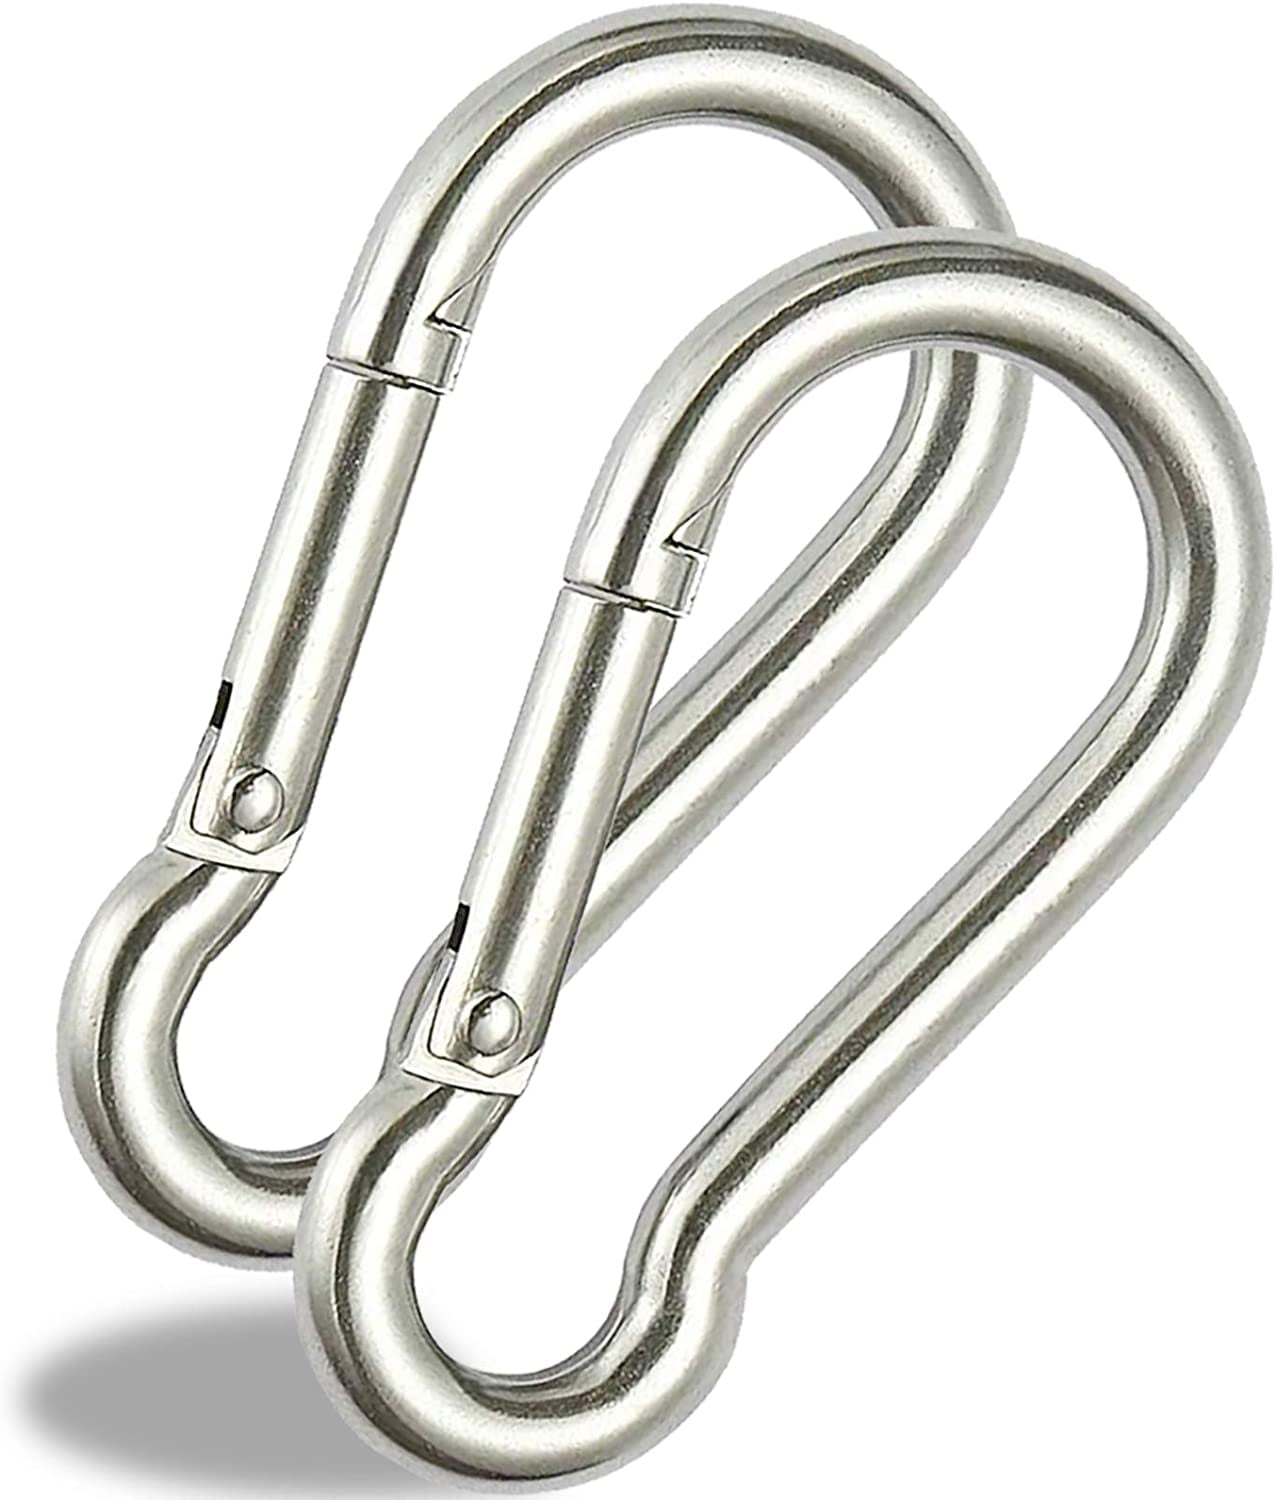 Heavy Duty Stainless Steel Carabiners Clip Hooks for Camping Hiking Climbing 